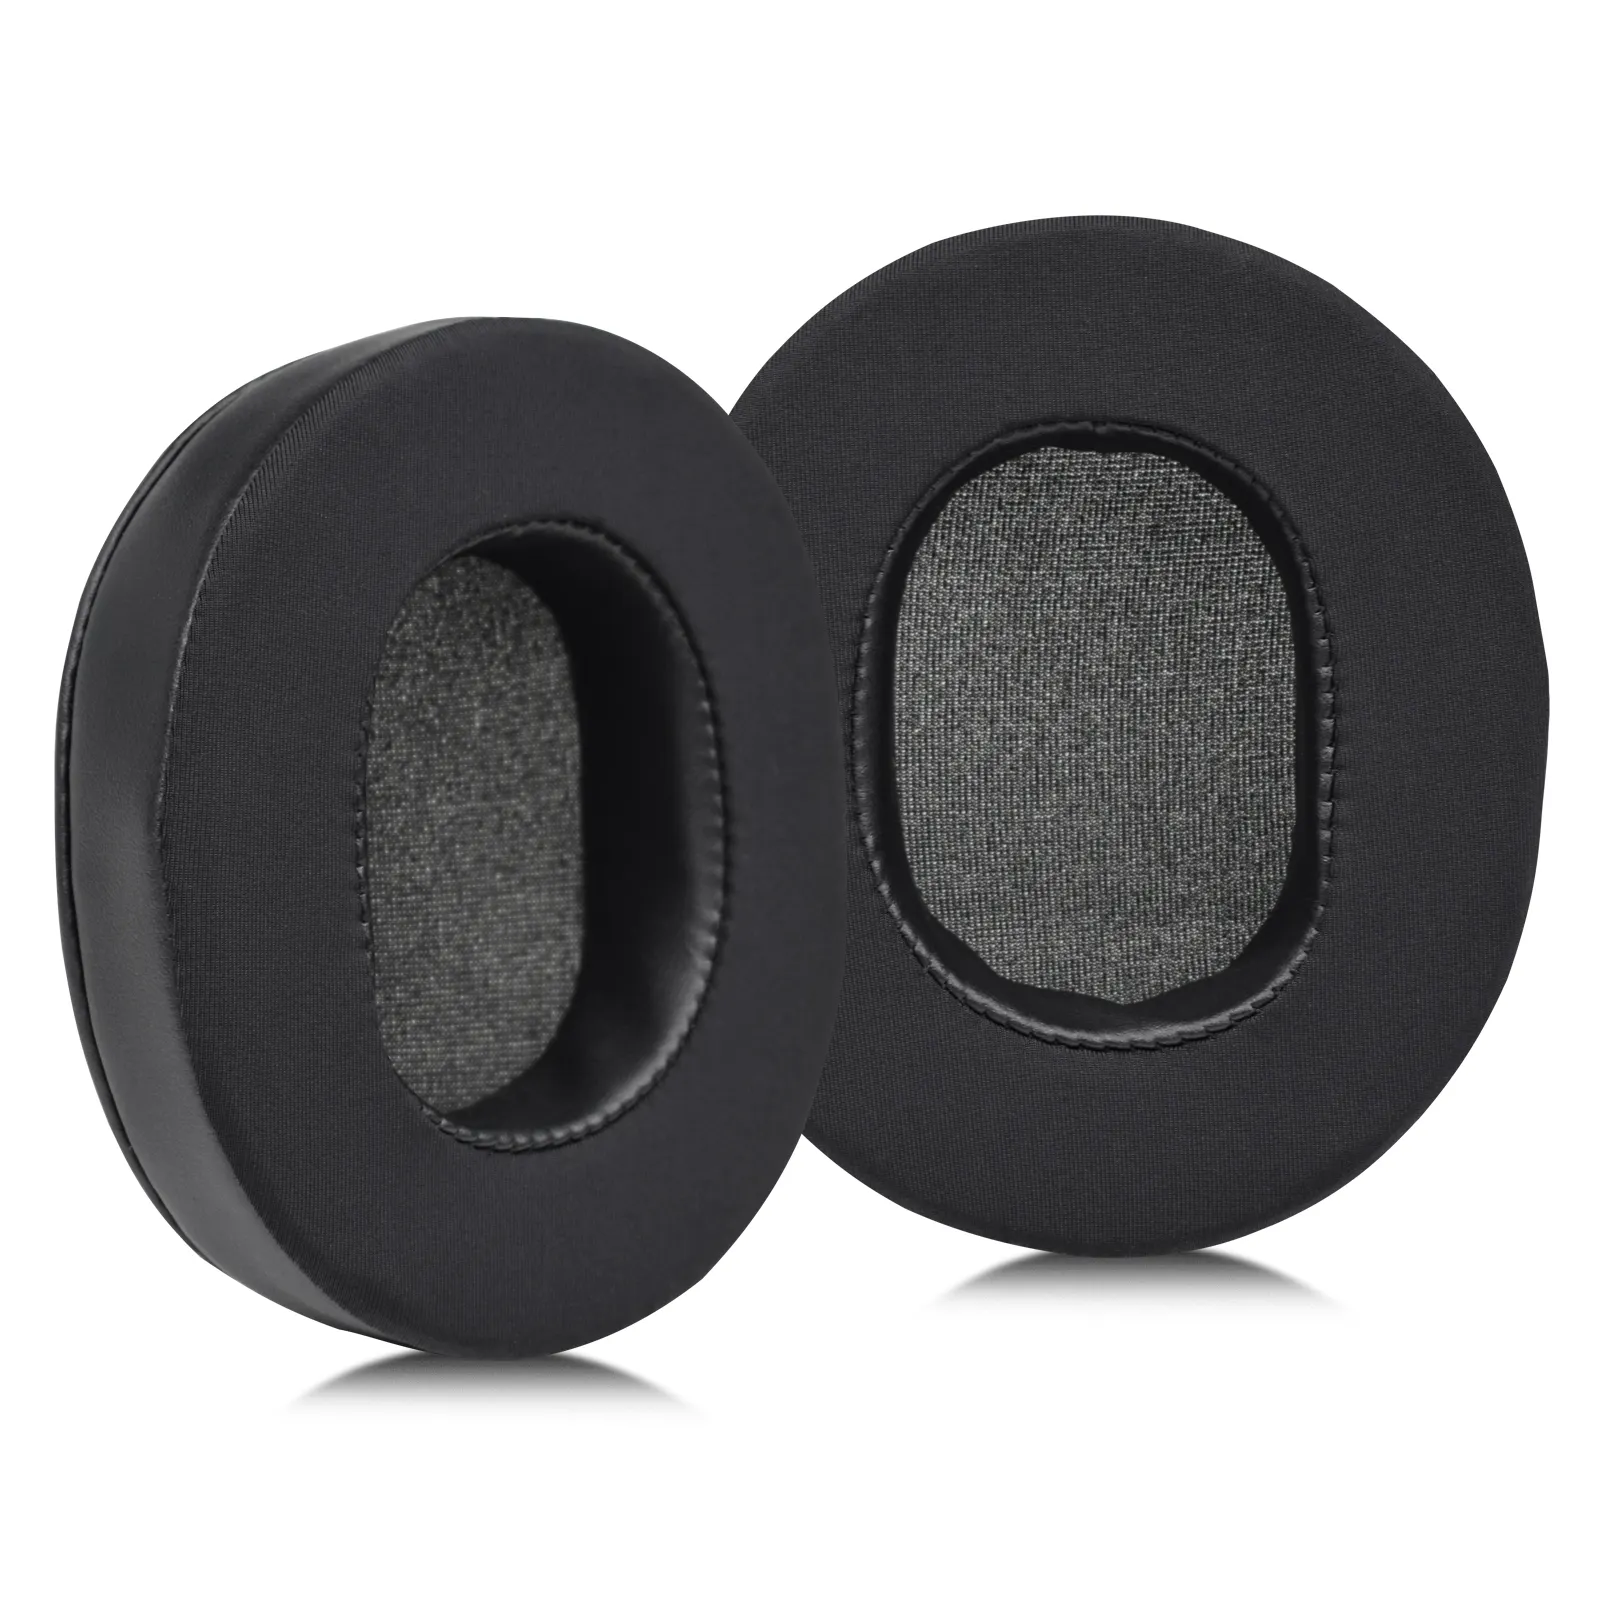 Replacement Cooling Gel Earpads Ear Pads for Audio Technica ATH M50X M50XBT M50 M40X M30 M20 M10 headphone